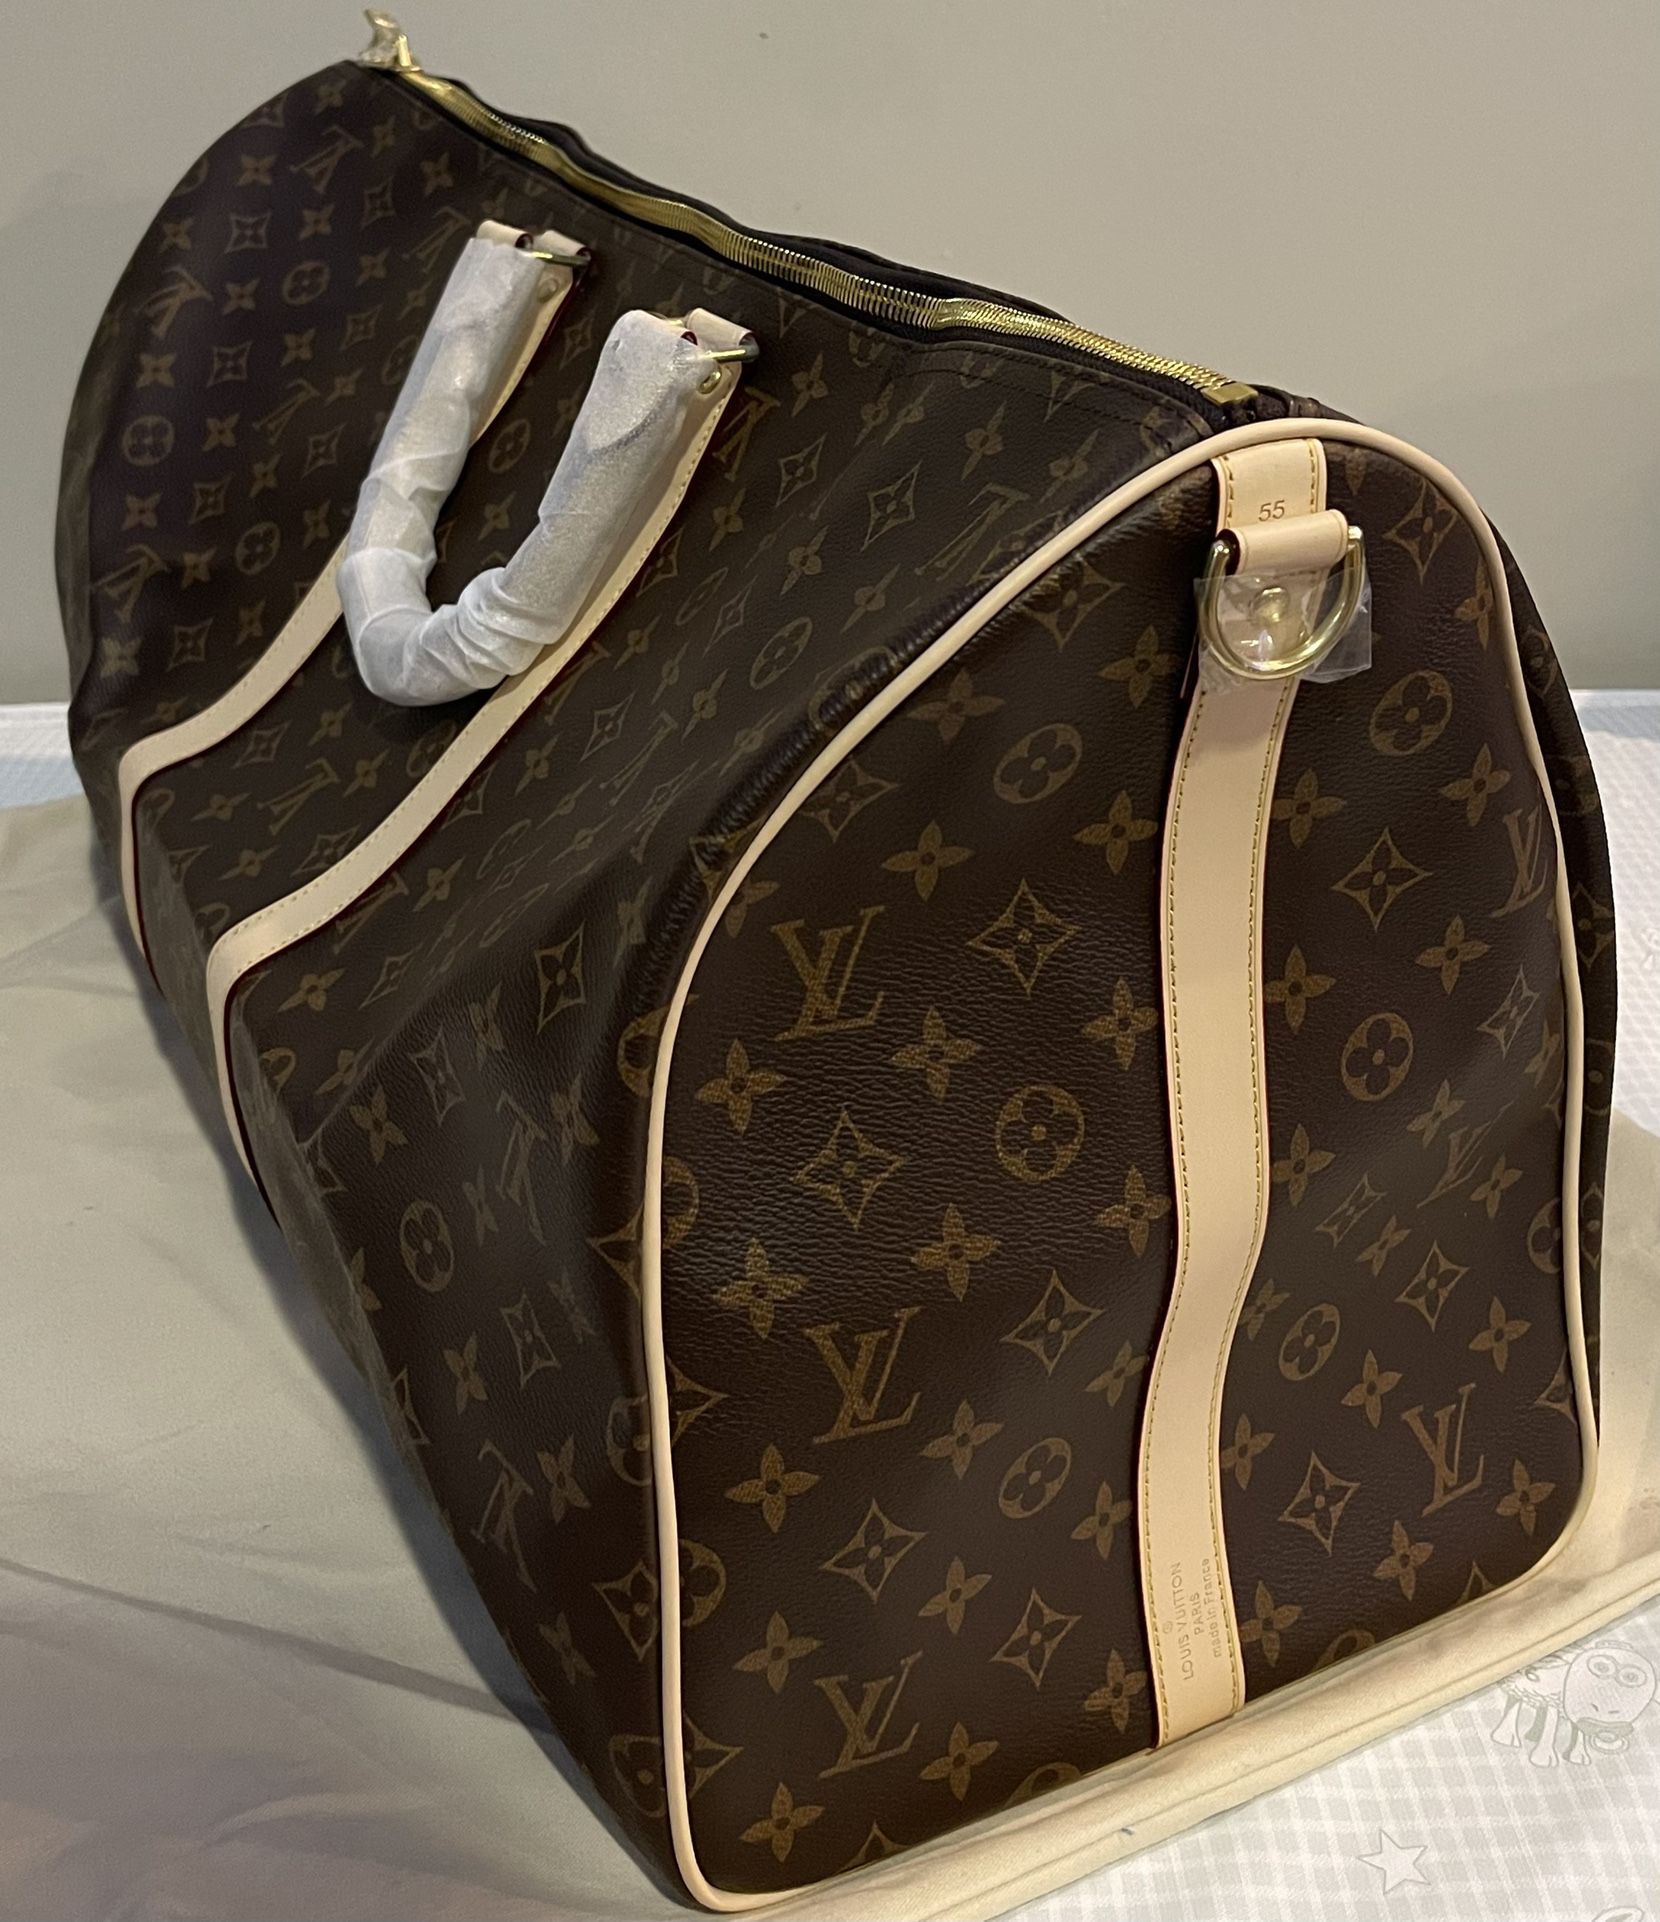 Louis Vuitton Gift Box - GIANT - EXTRA LARGE/HUGE